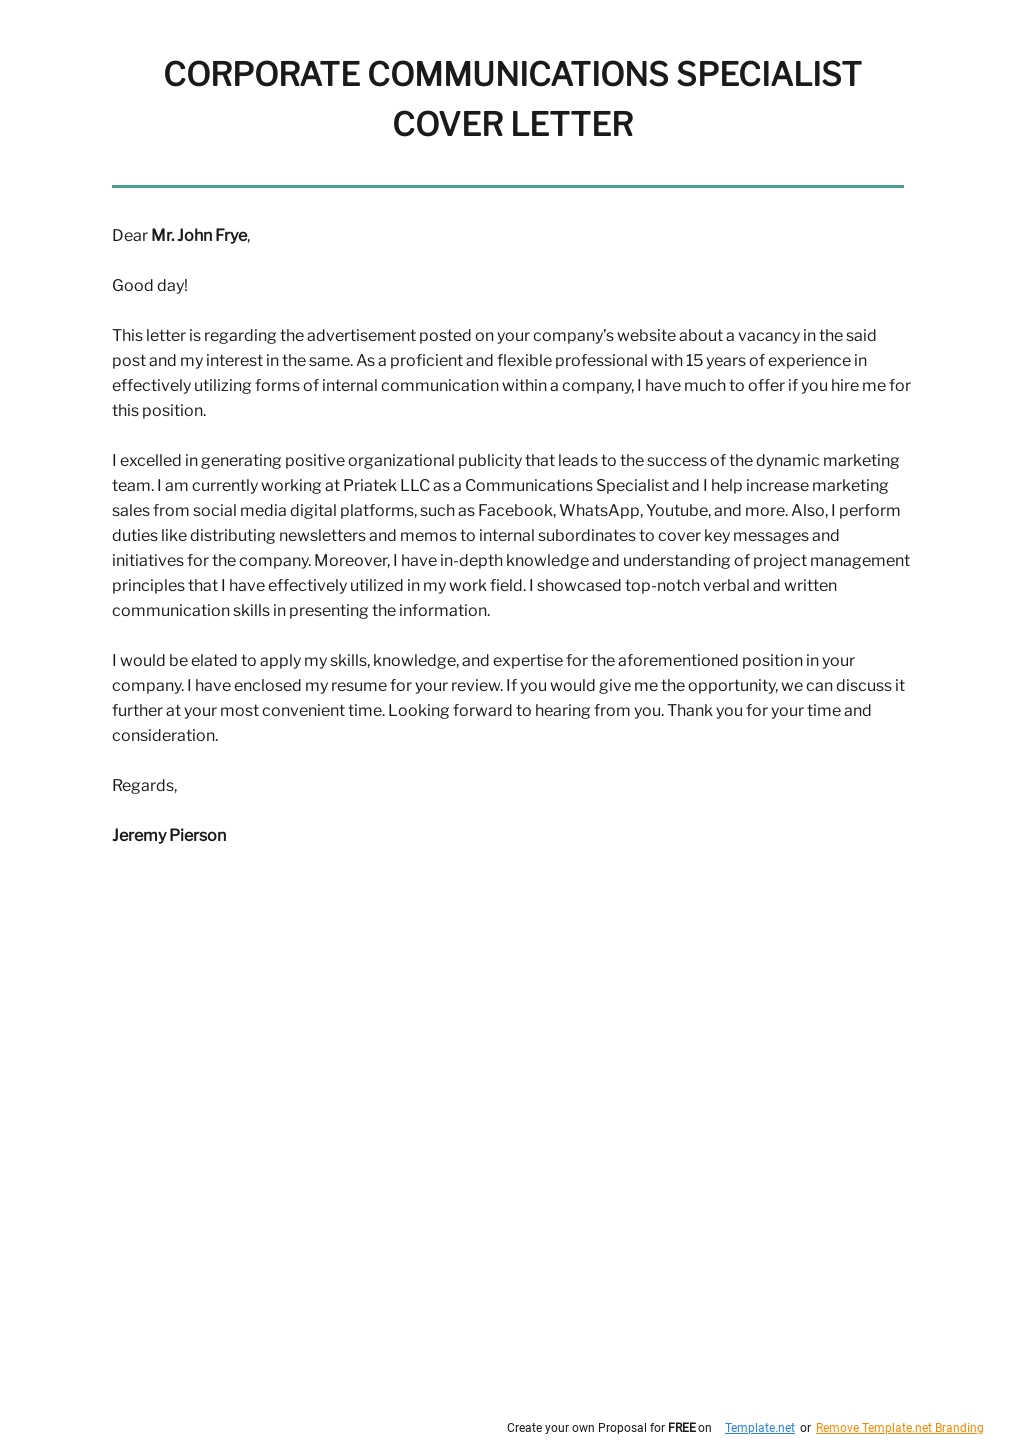 Free Corporate Communications Specialist Cover Letter Template.jpe